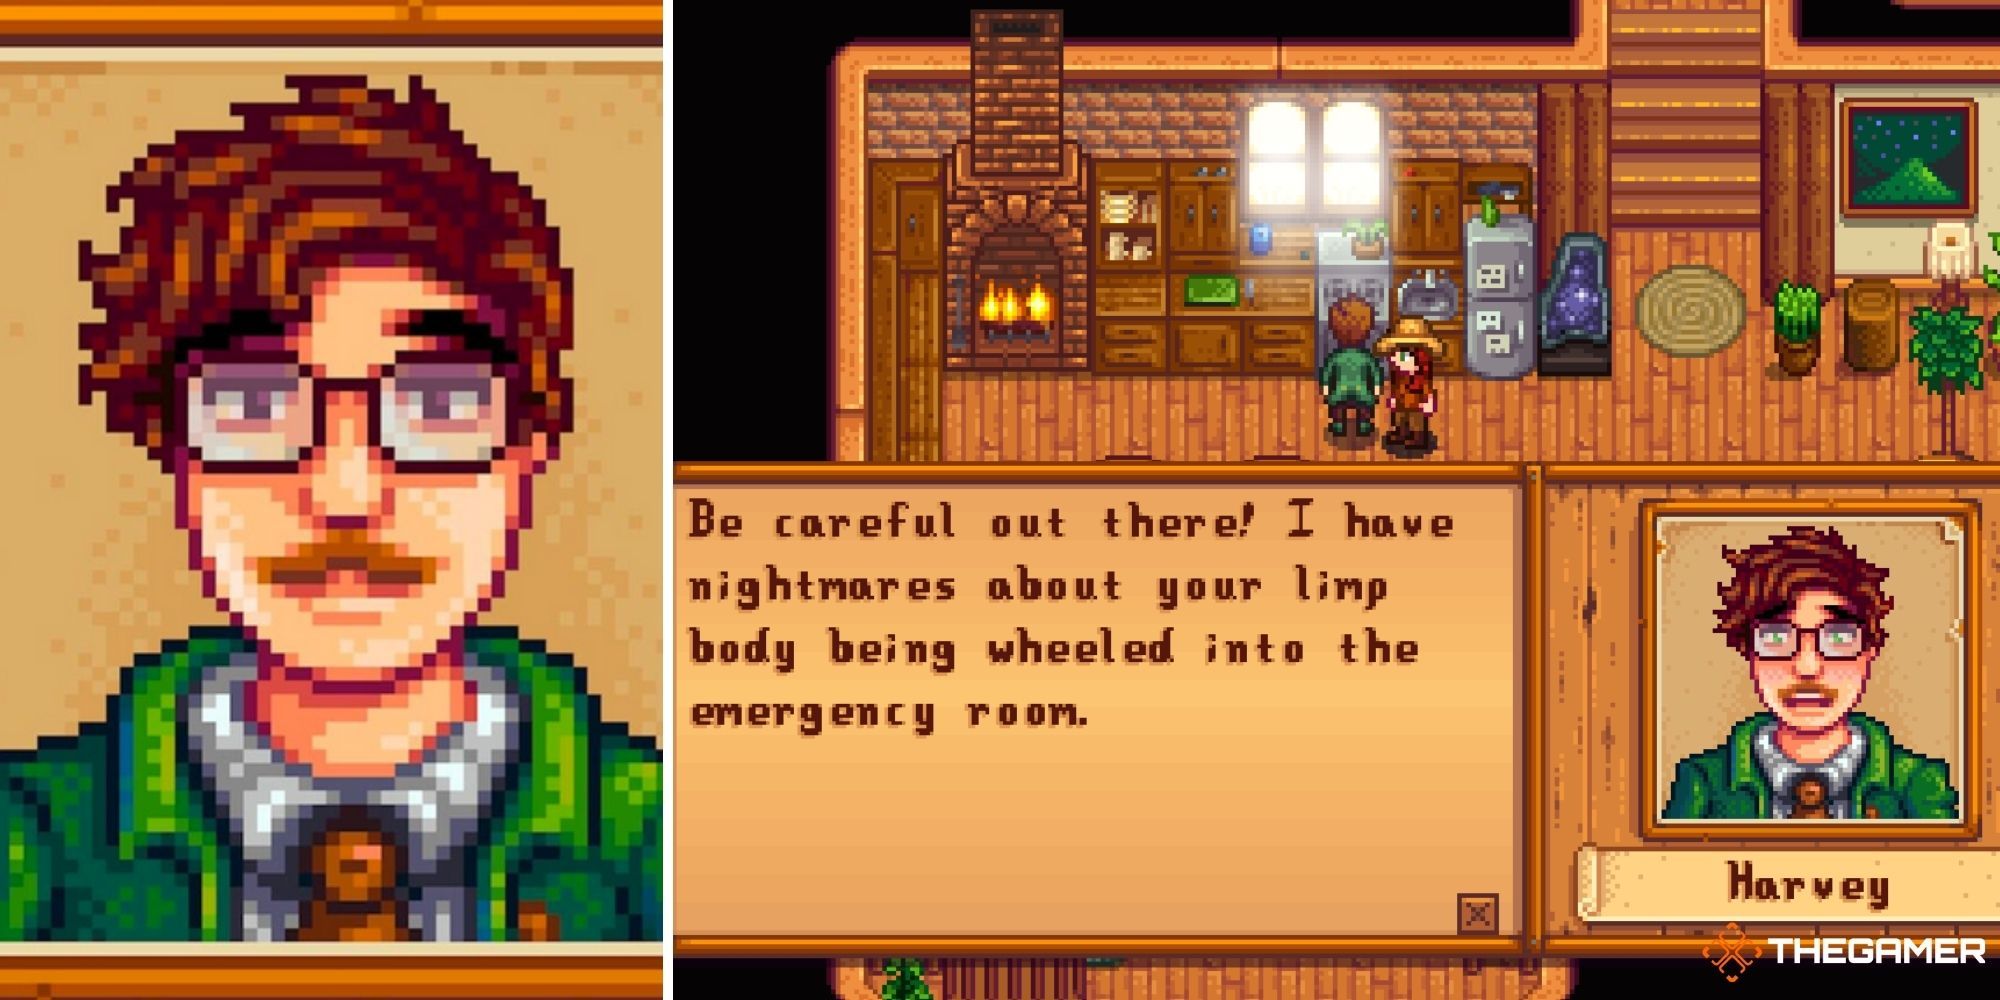 Stardew Valley Split Image - Harvey (left - closeup of face) (right - textbox of character talking)